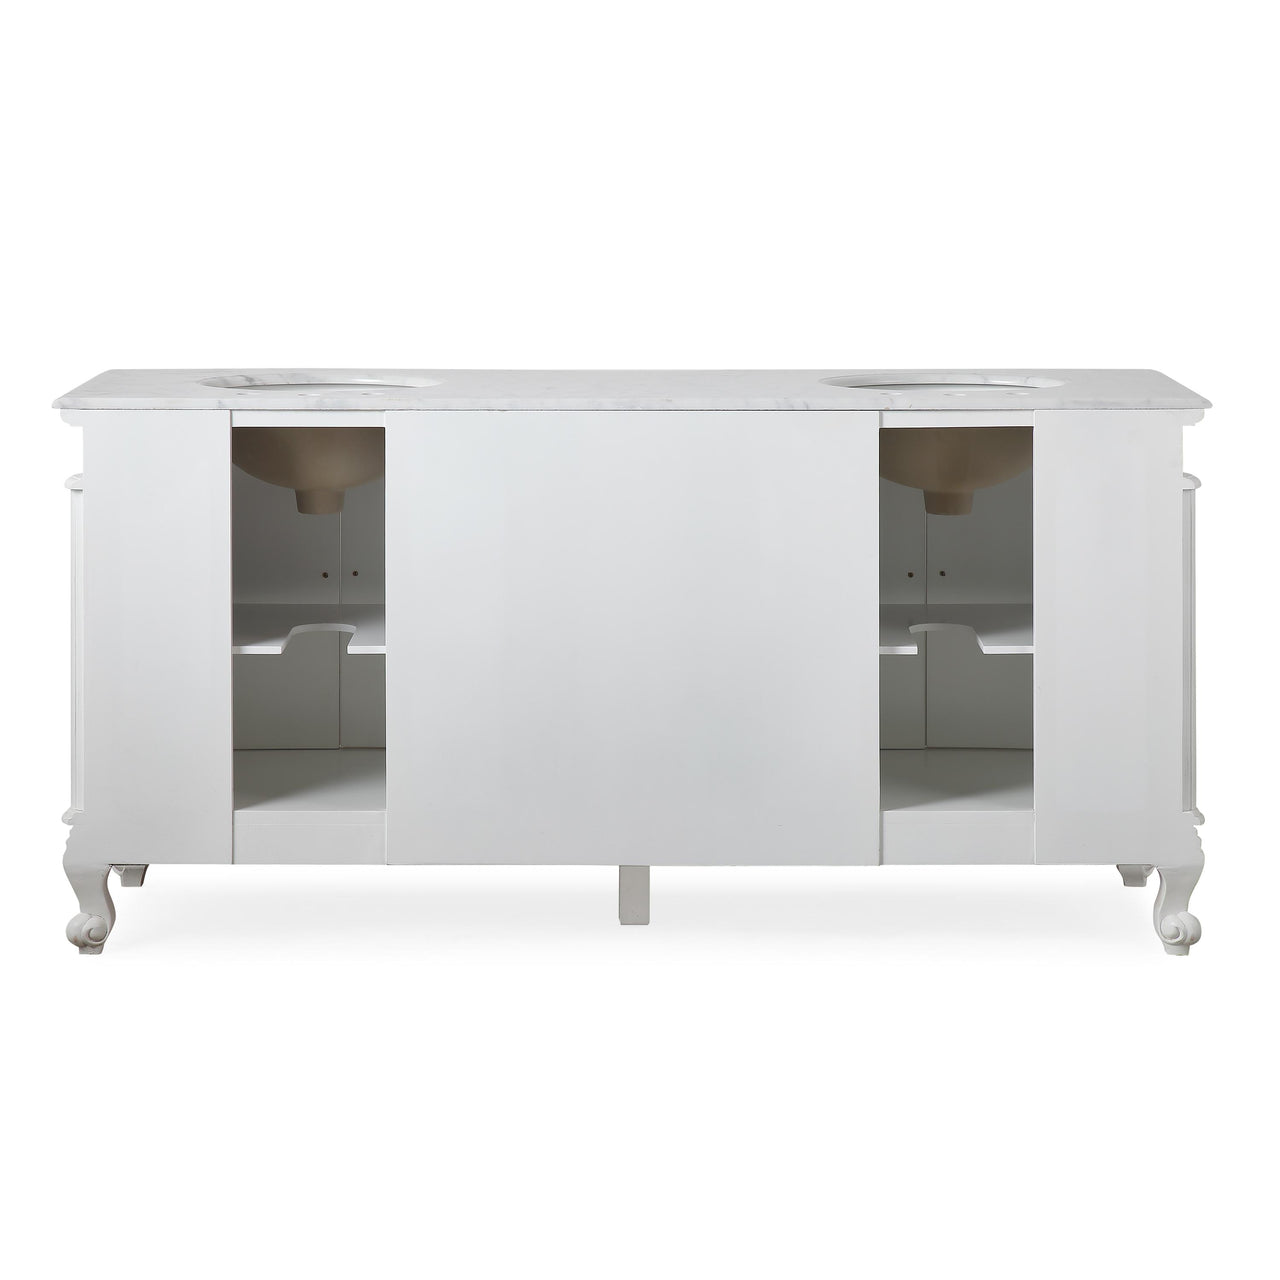 SilkRoad 72" Double Sink White Cabinet - Carrara White Marble Top, Ceramic Sink (3-hole)